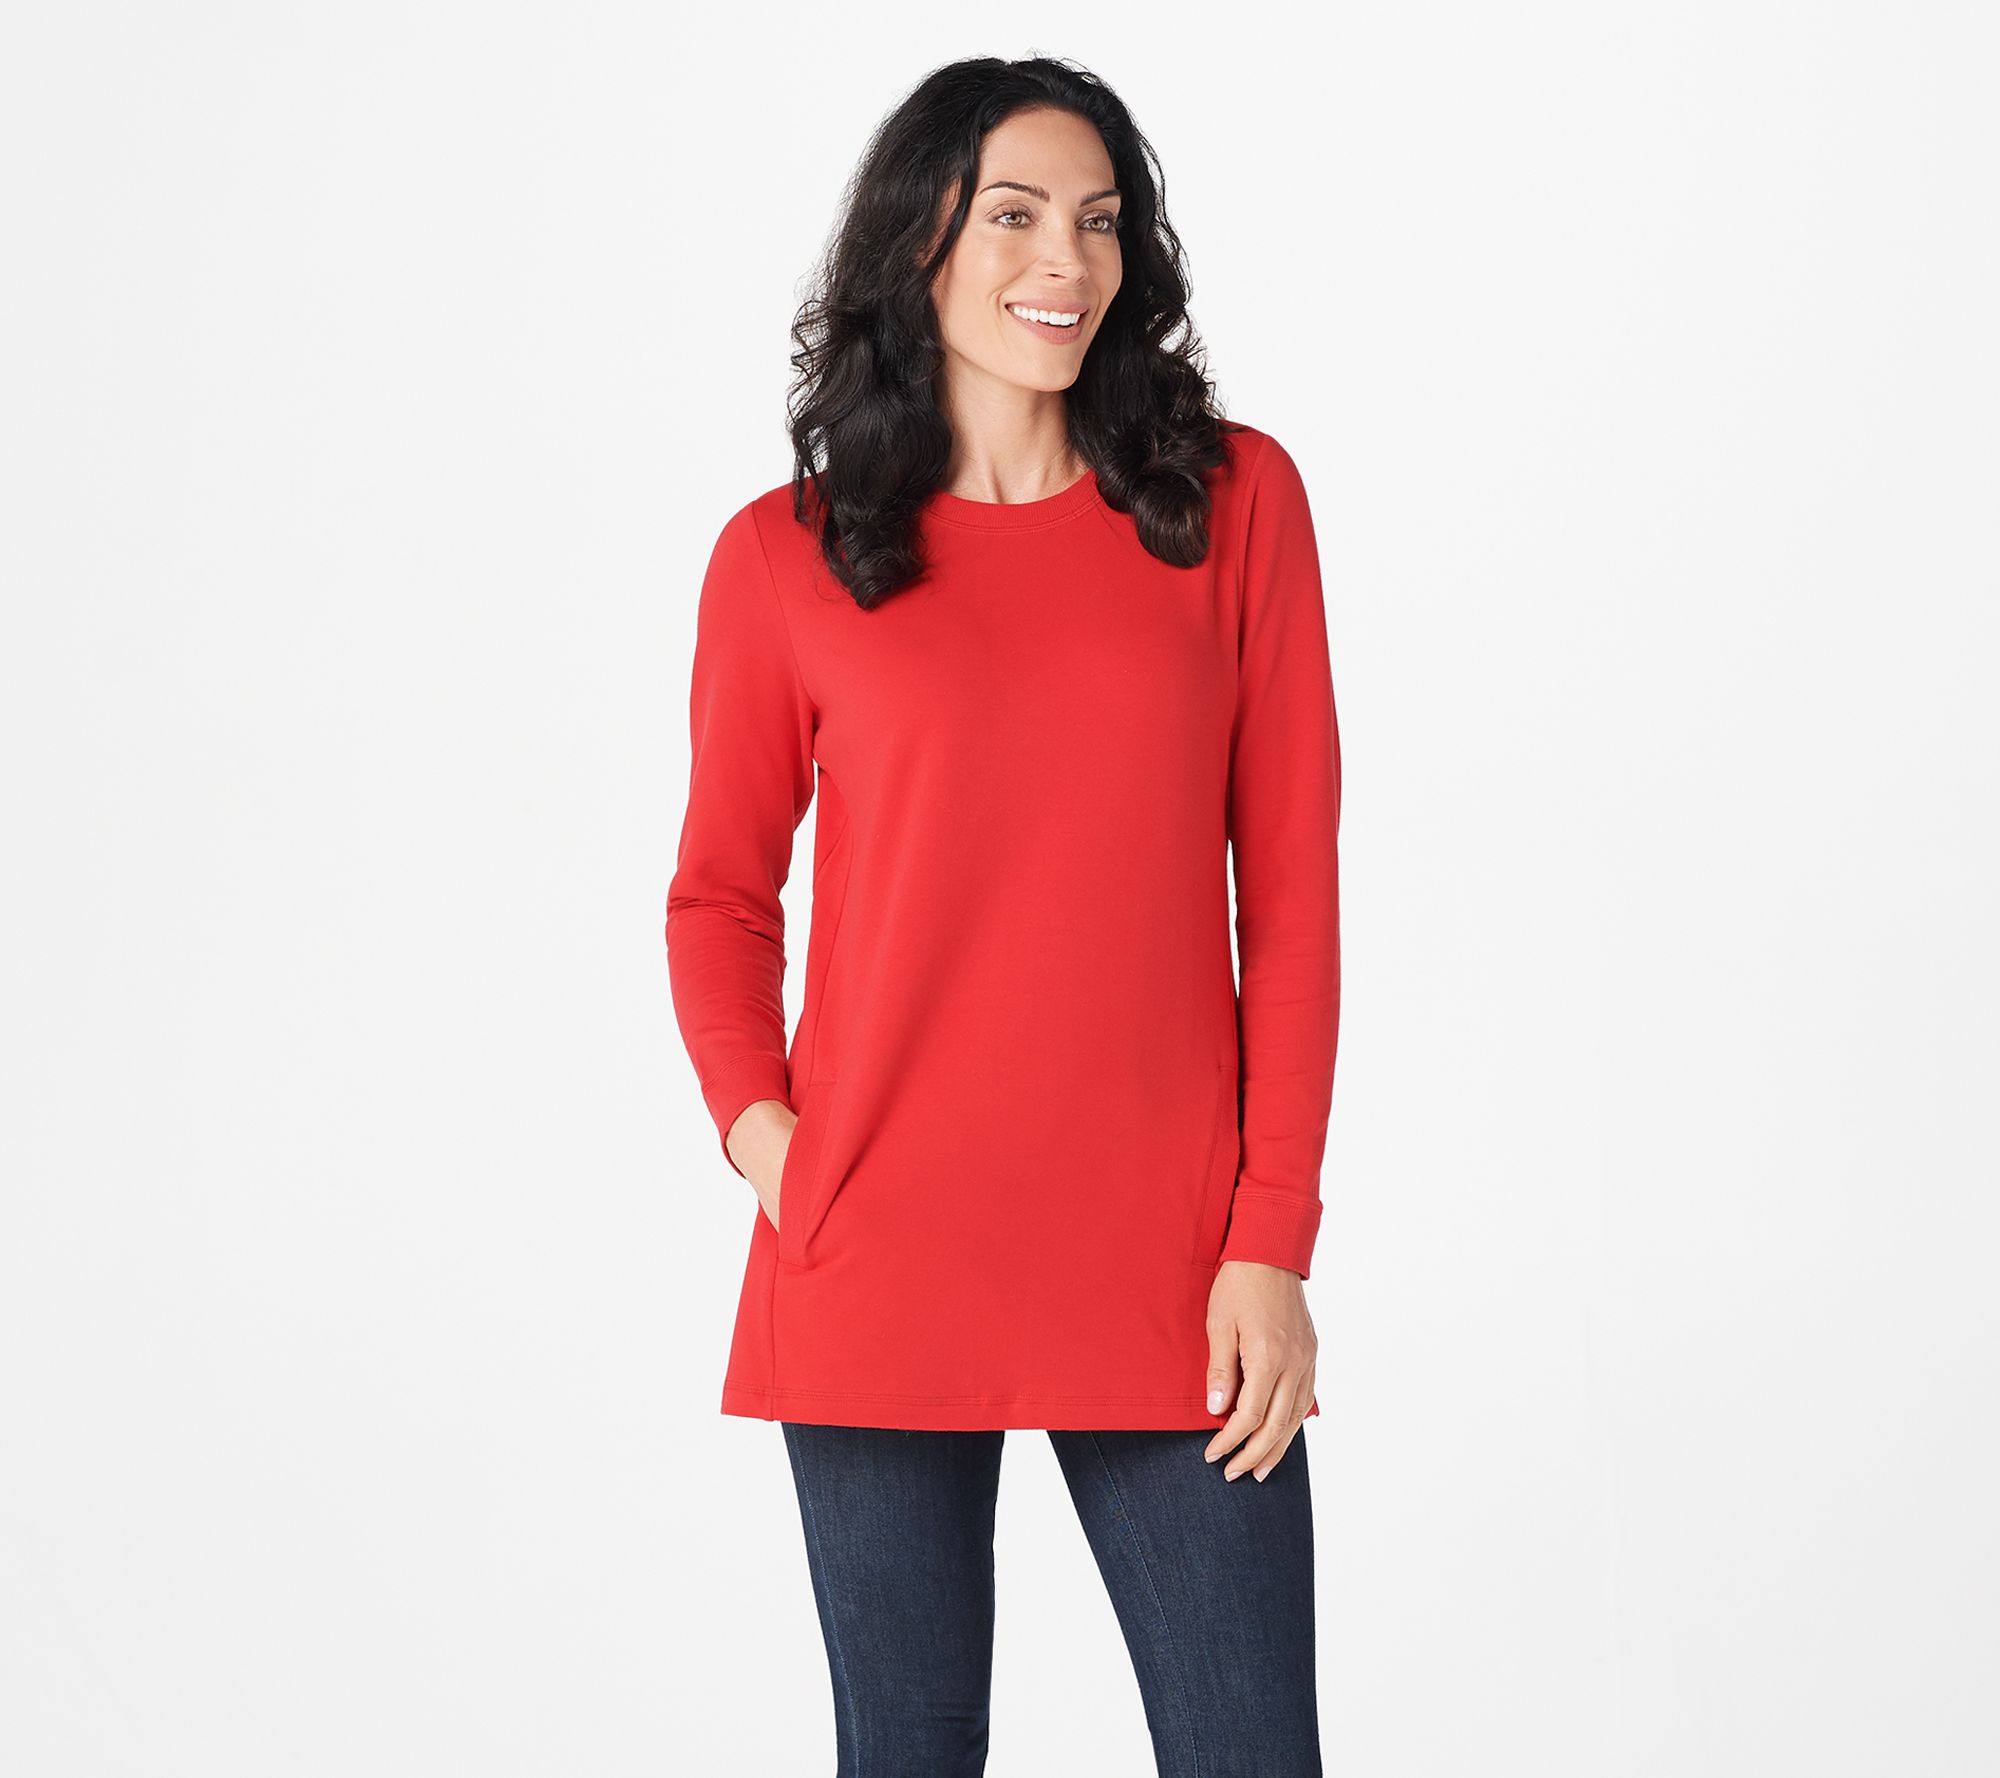 Tunic Tops for Leggings Long Sleeve Crew Neck Soft Tunic Top